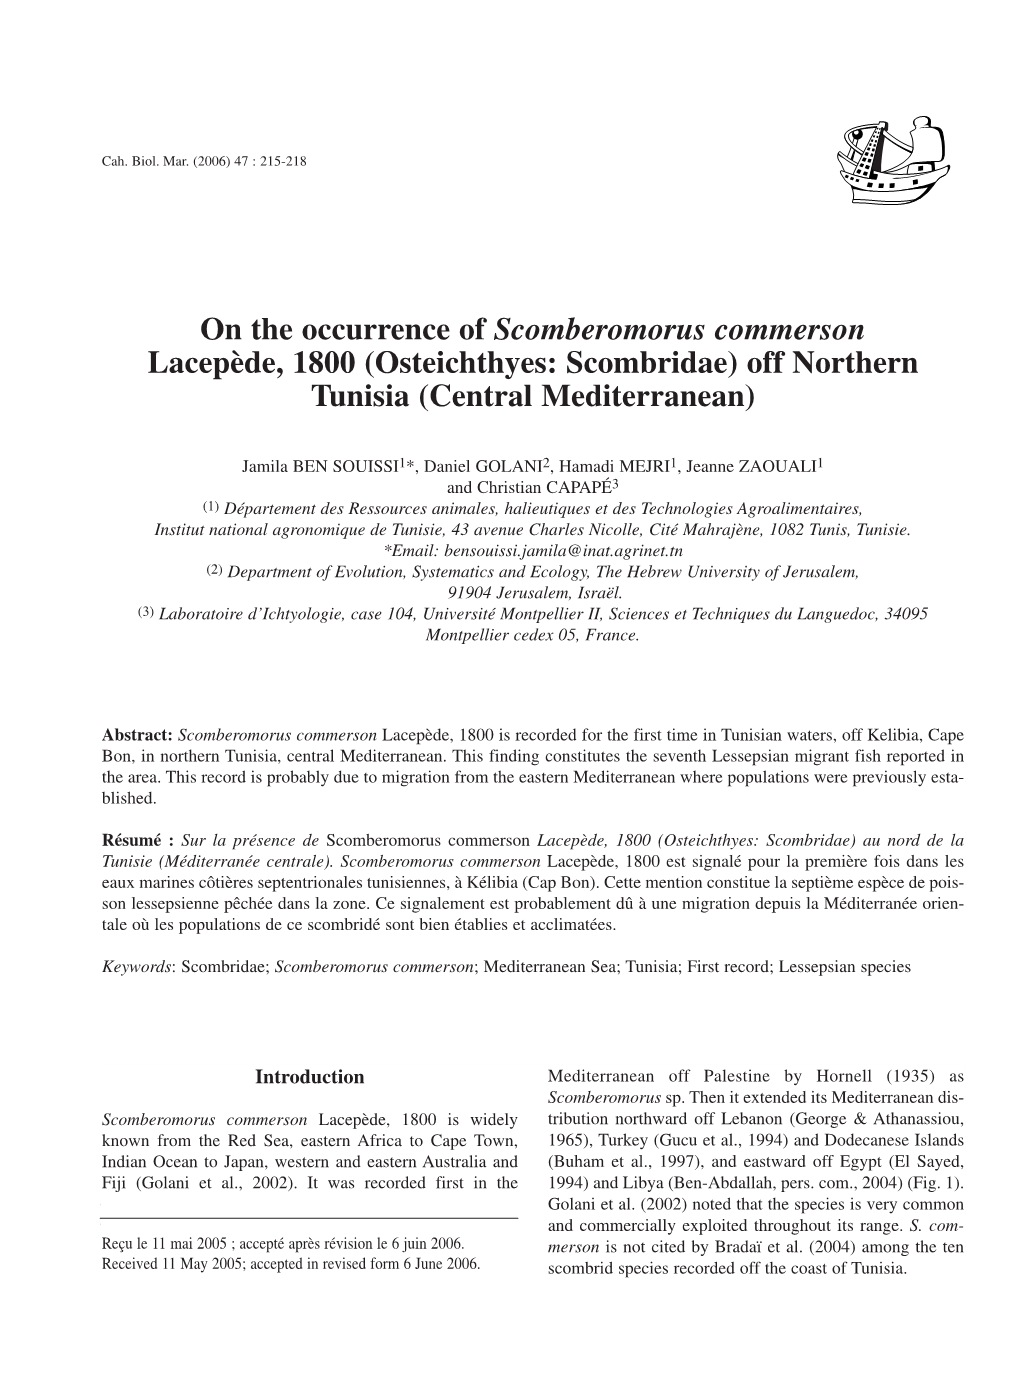 On the Occurrence of Scomberomorus Commerson Lacepède, 1800 (Osteichthyes: Scombridae) Off Northern Tunisia (Central Mediterranean)